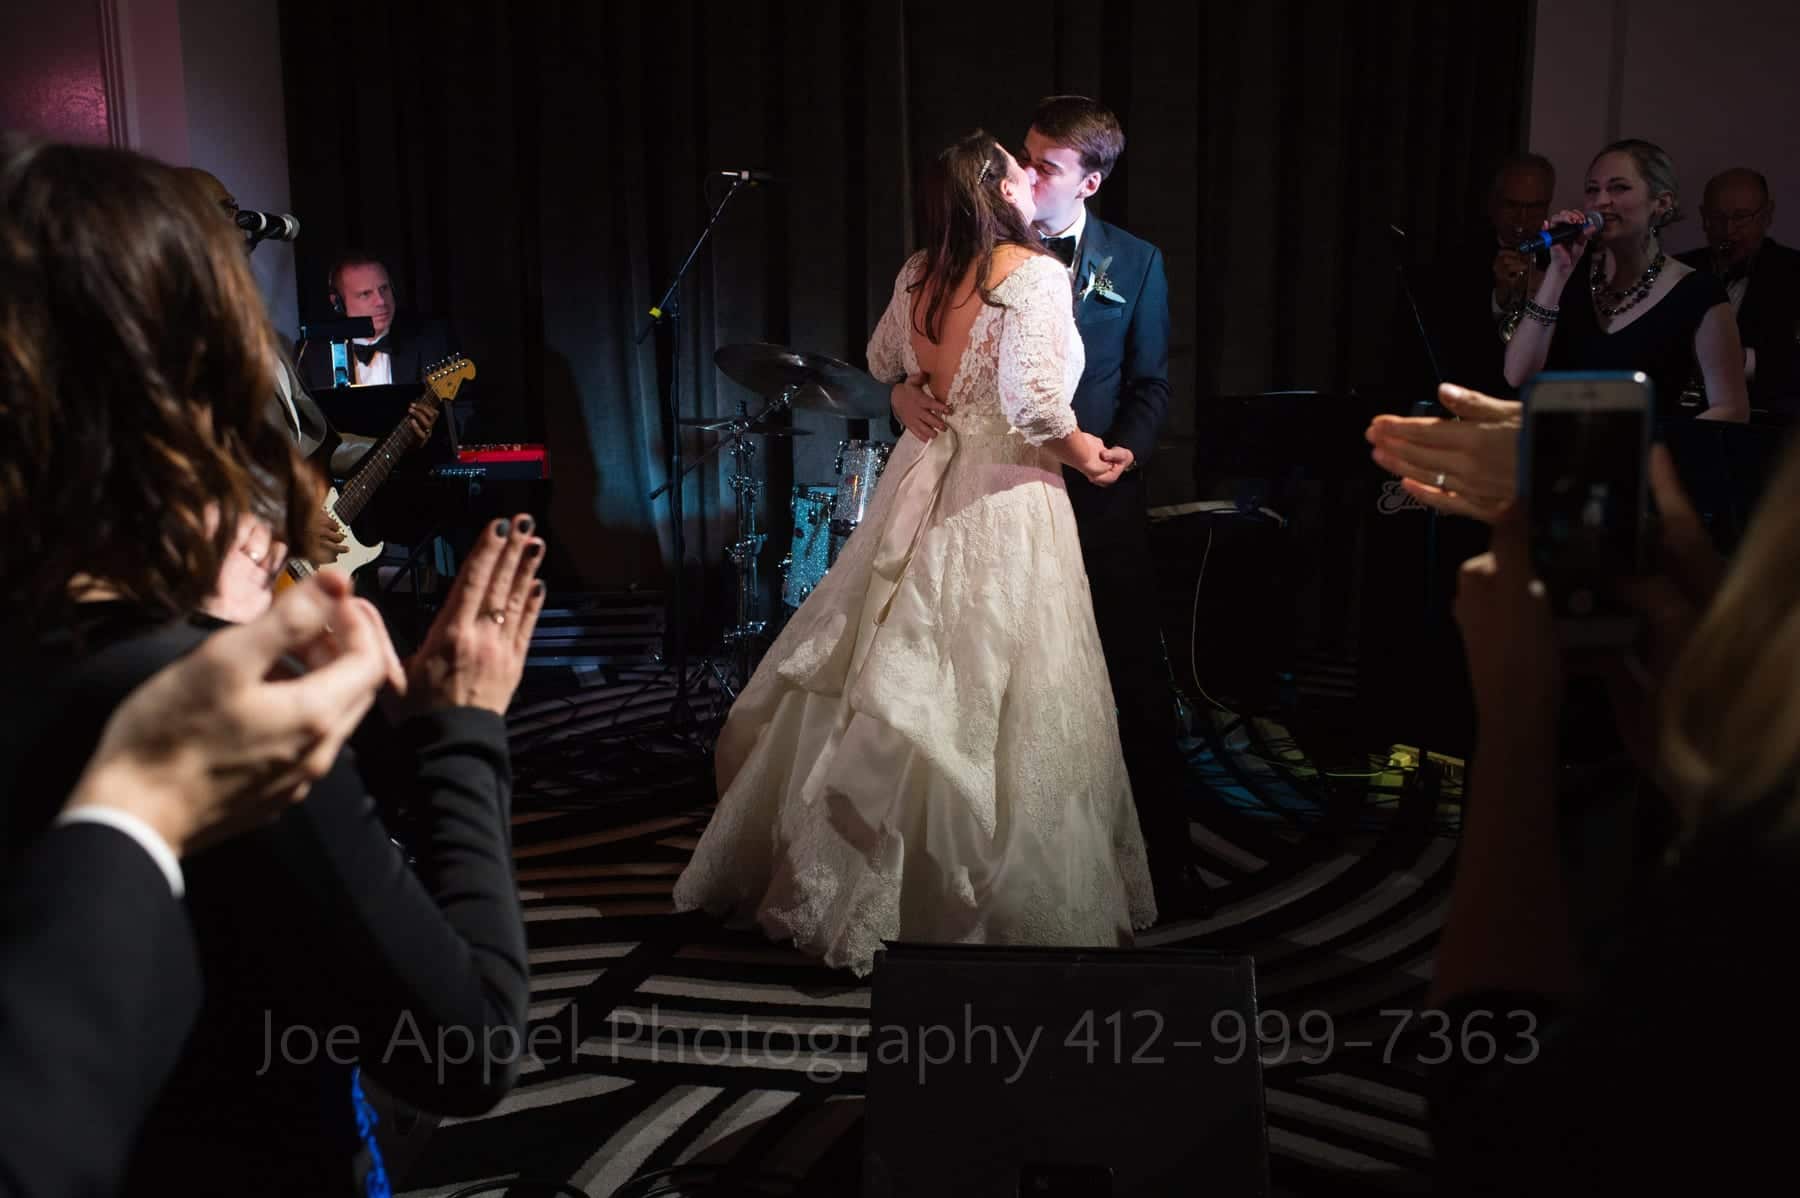 guests clap as the bride and groom dance and kiss under a spotlight at the end of the evening at the hotel monaco pittsburgh wedding